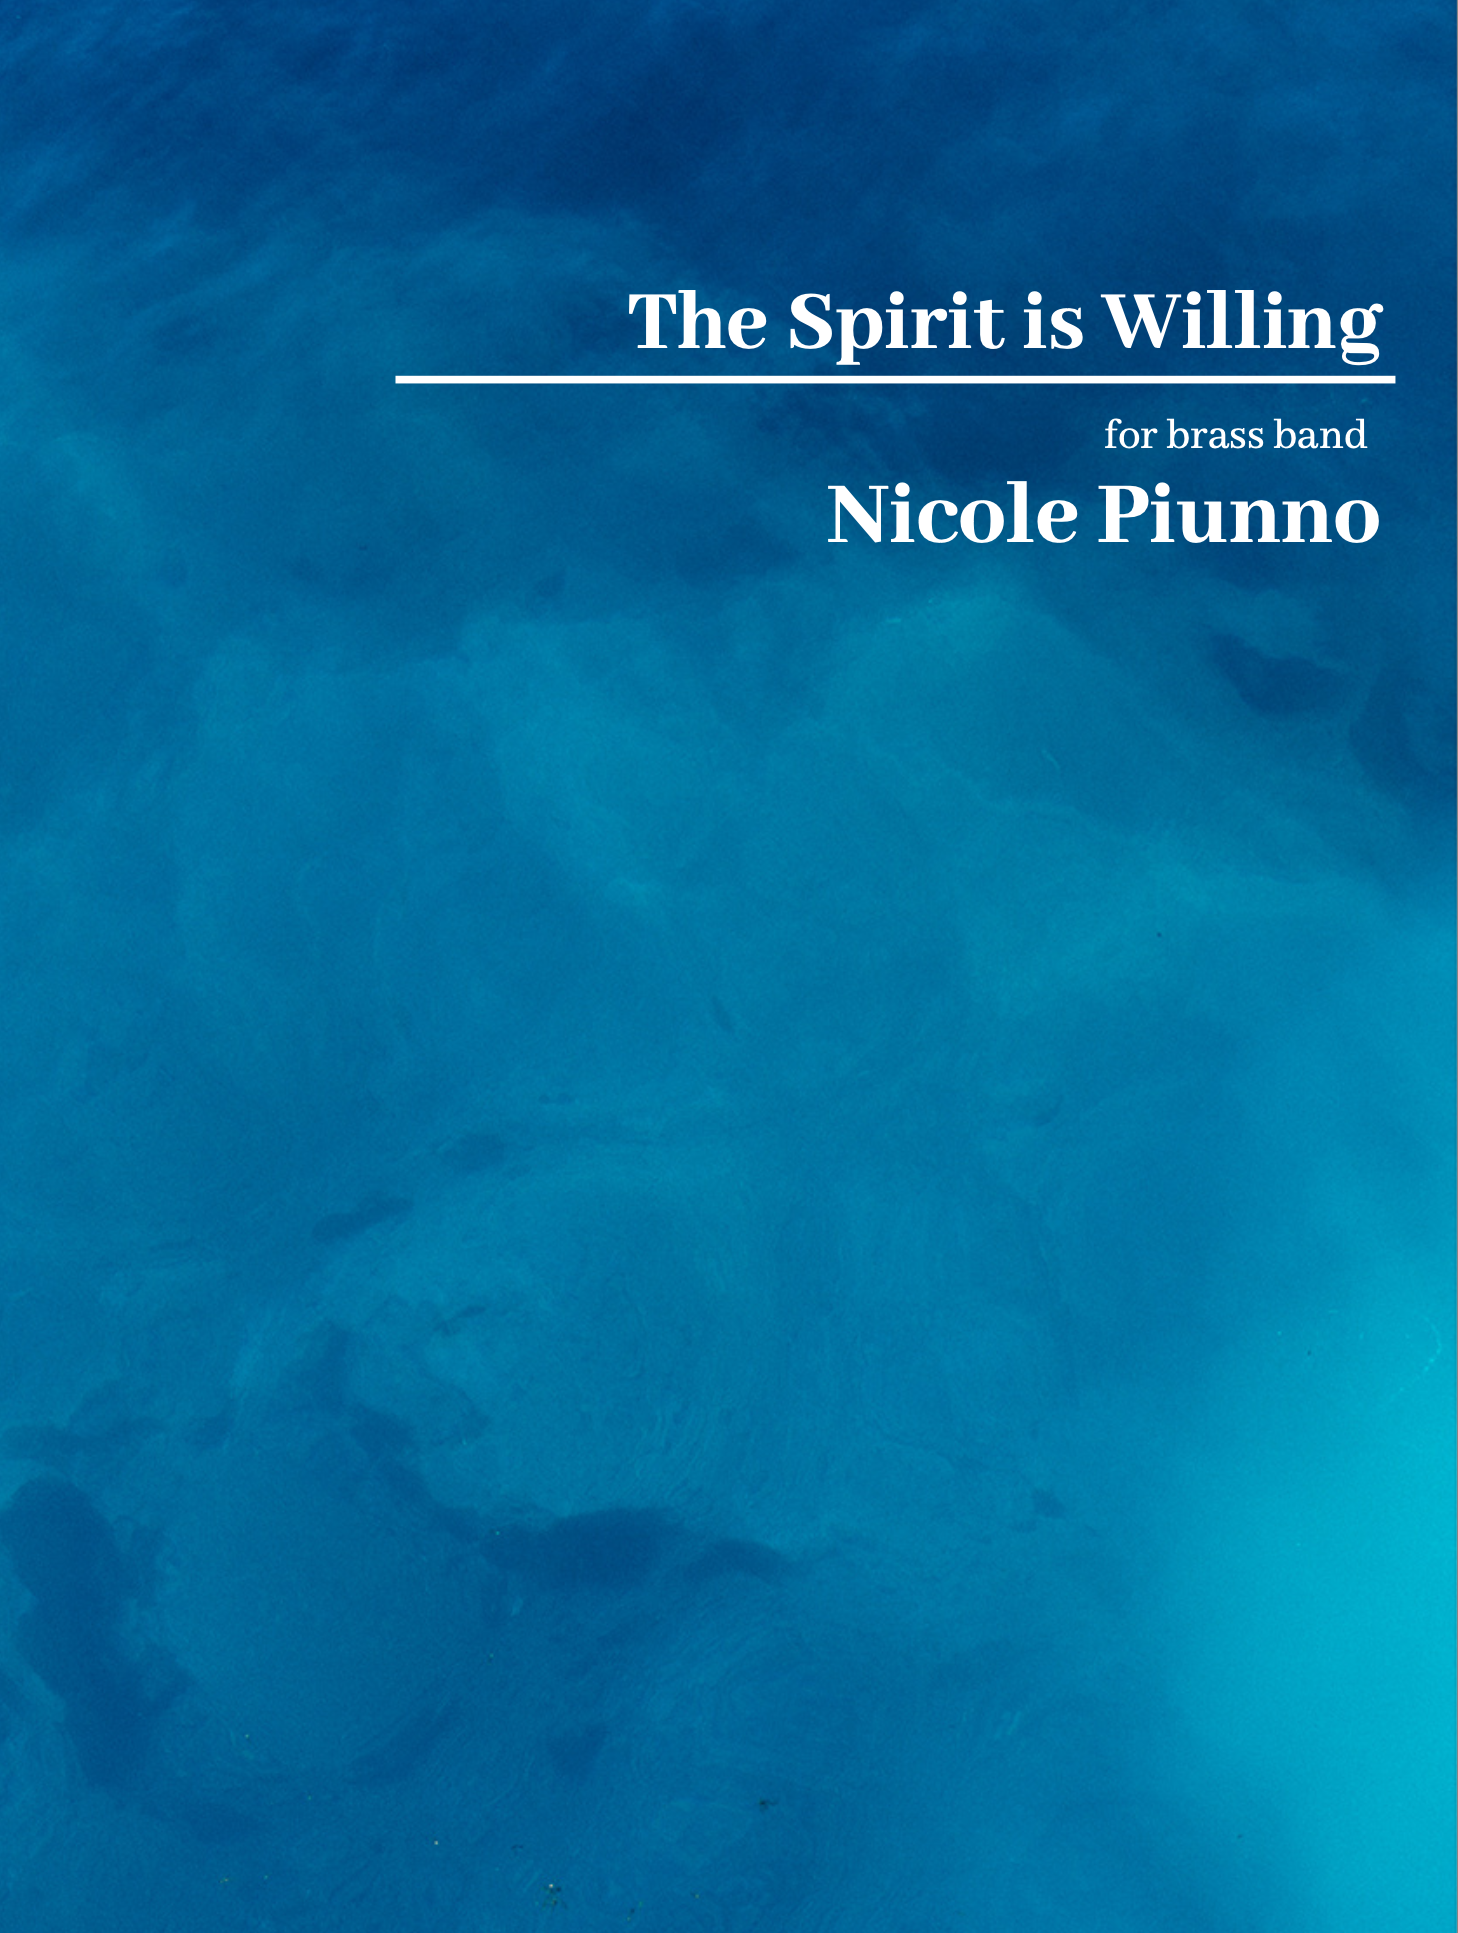 The Spirit Is Willing (Score Only) by Nicole Piunno